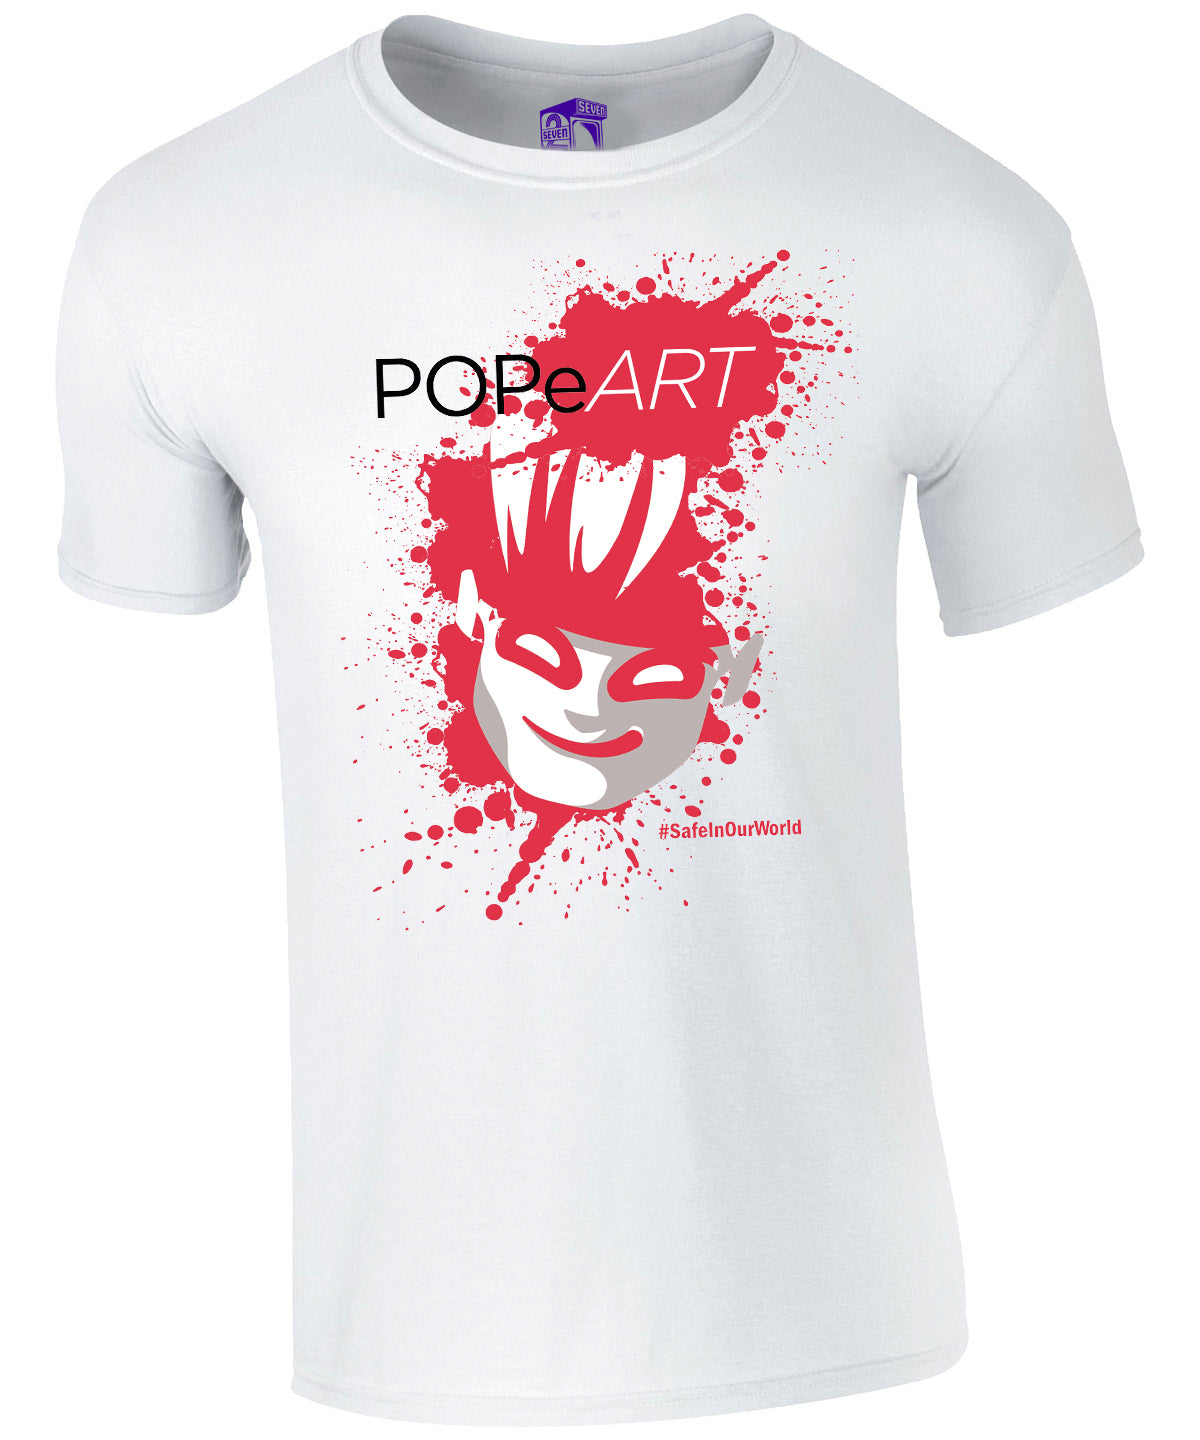 POPeART T-Shirt (SIOW Edition) T-Shirt Seven Squared Small 34-36" White 